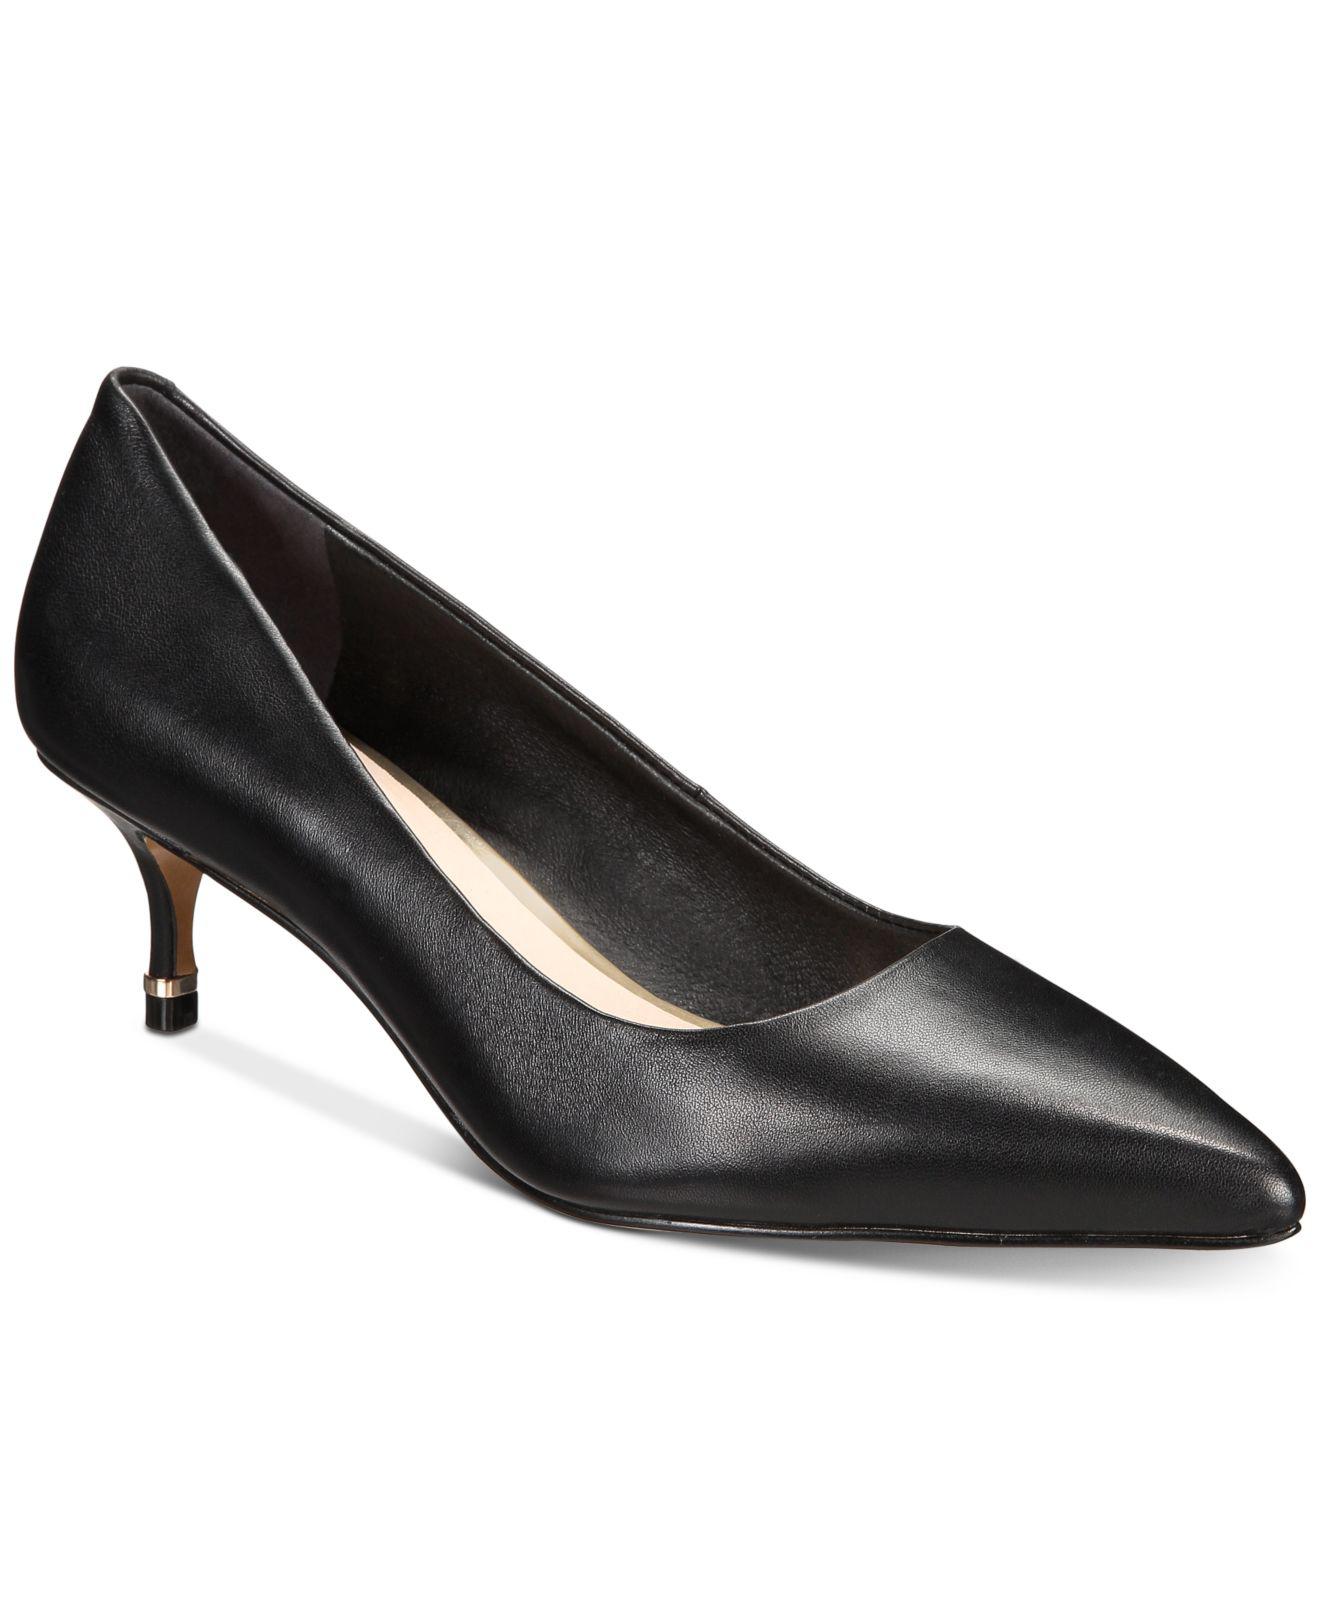 Kenneth Cole Kitten High Heels Classic Pumps BLACK LEATHER POINTED TOE 2" Heel 